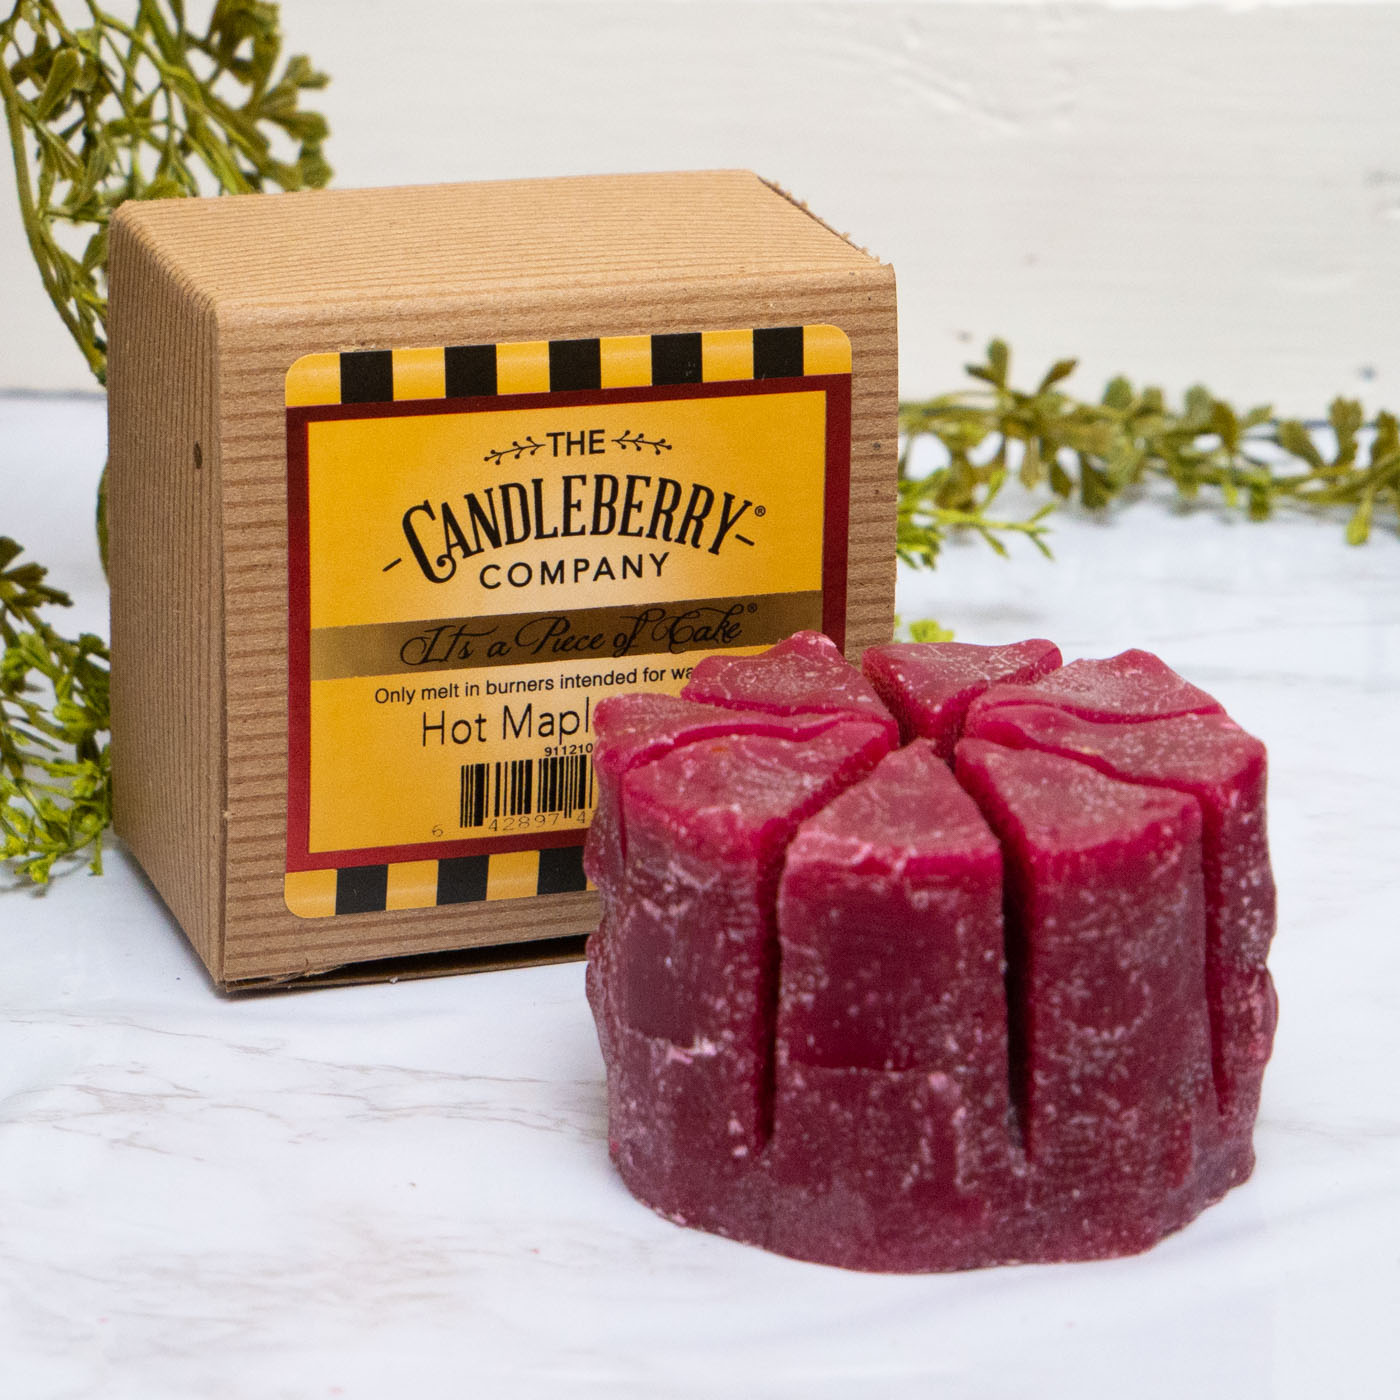 Candleberry Hot Maple Toddy Scented Candle Melts | Best Wax Melts for Candle Warmers | Scented Wax Melts | Cake Simmering Tart Melt